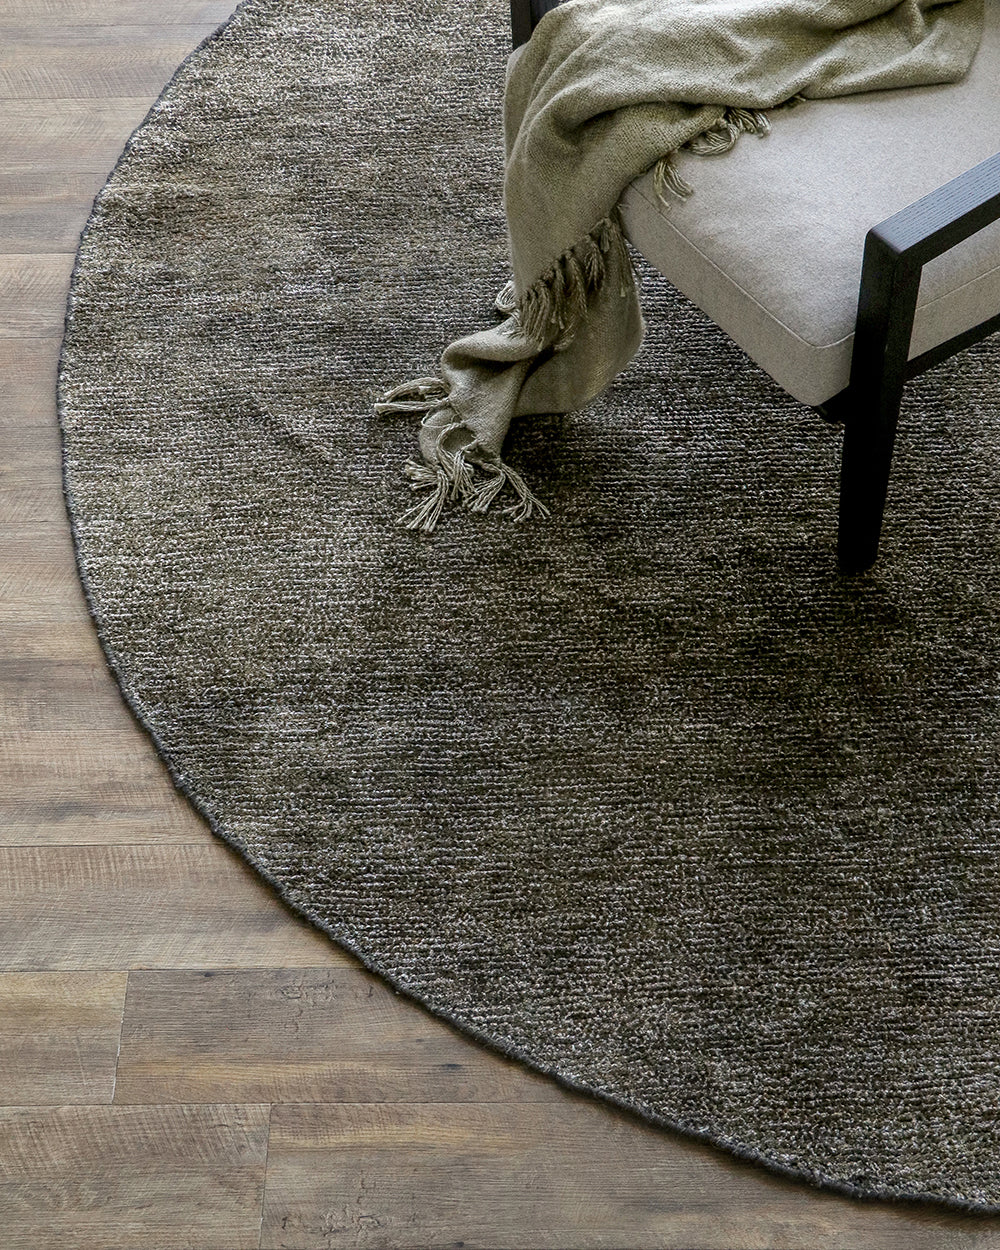 Anchorage Gravel Round Rug from Baya Furtex Stockist Make Your House A Home, Furniture Store Bendigo. Free Australia Wide Delivery. Mulberi Rugs.